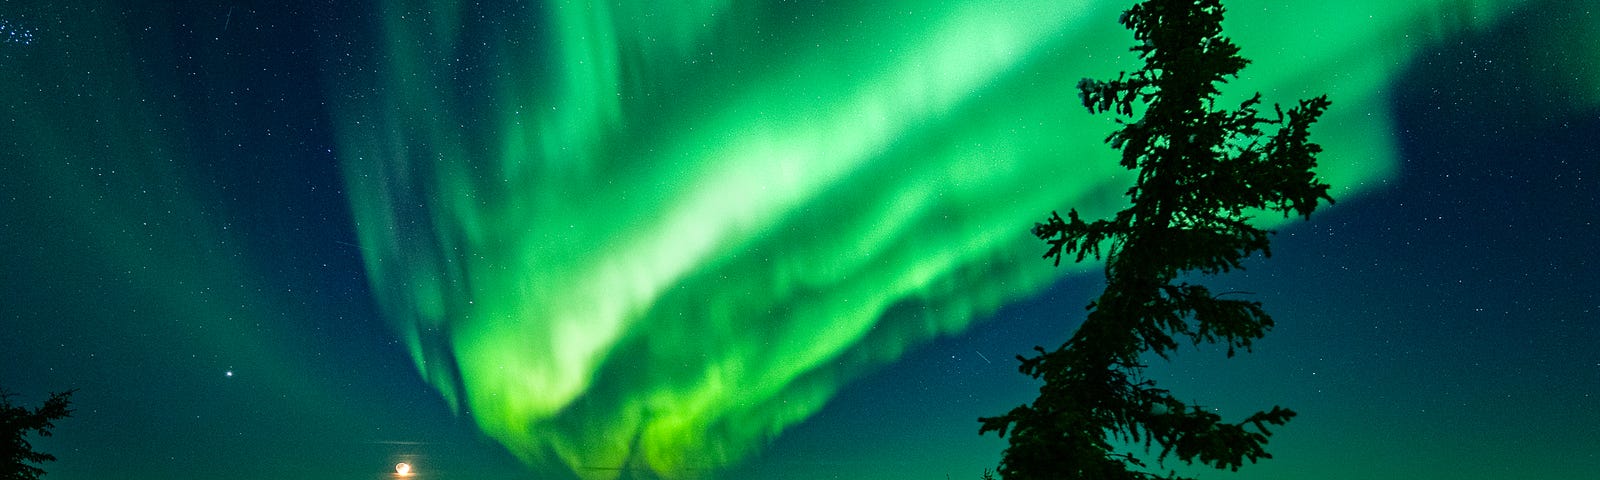 My new friend Jeff stares up at the sky, taking in the awe and wonder of a moment we had worked so hard to catch. The northern lights oscillated green and yellow in waves above our heads.